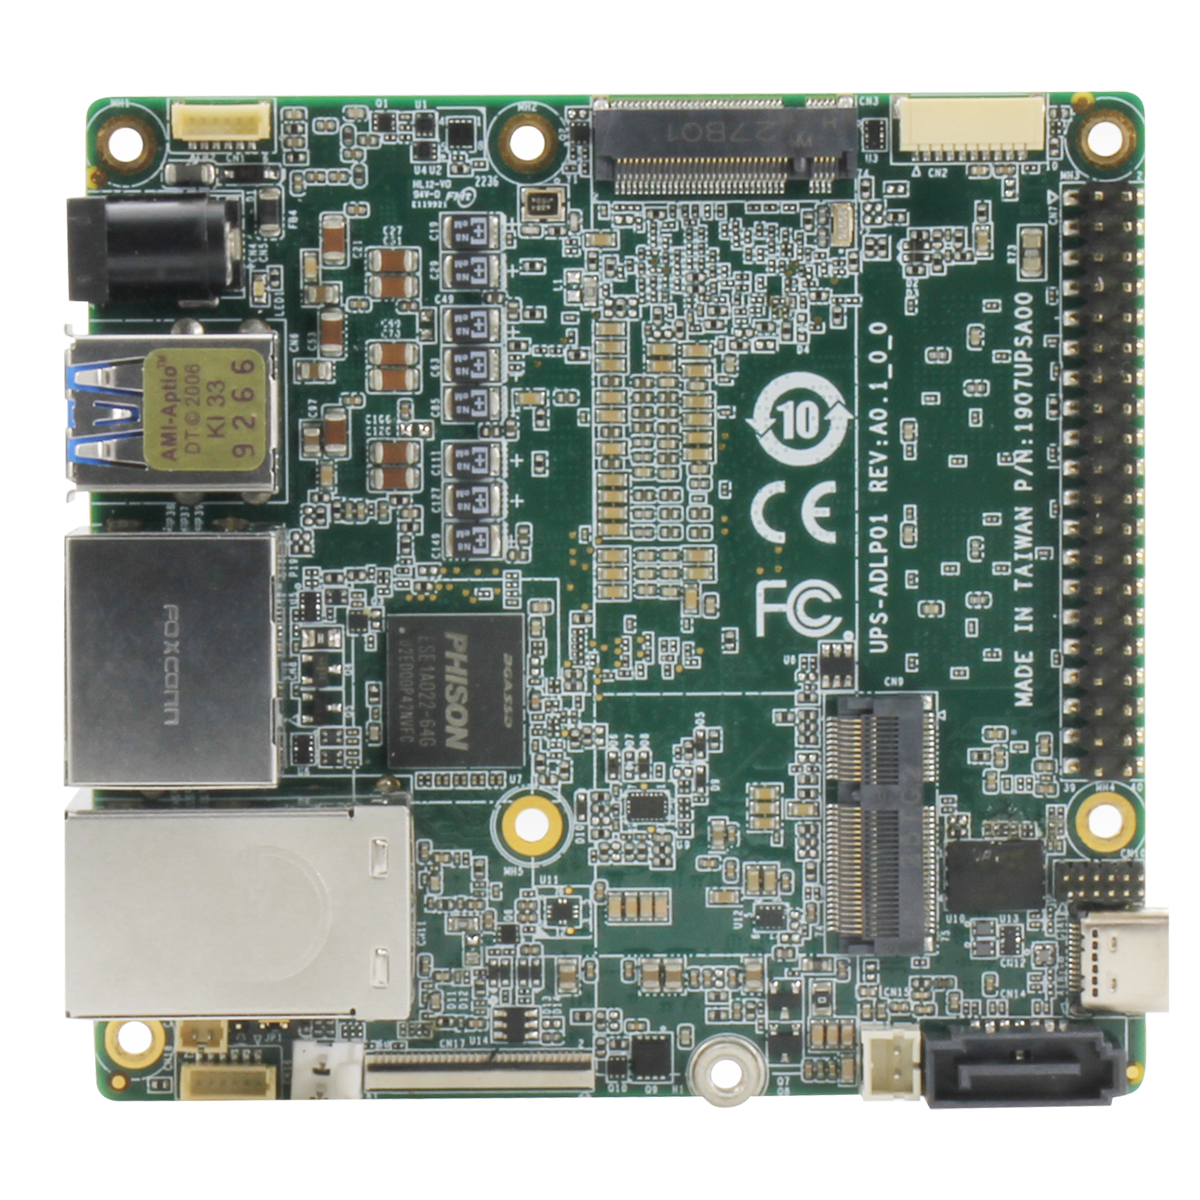 UP Squared i12 embedded board back view.